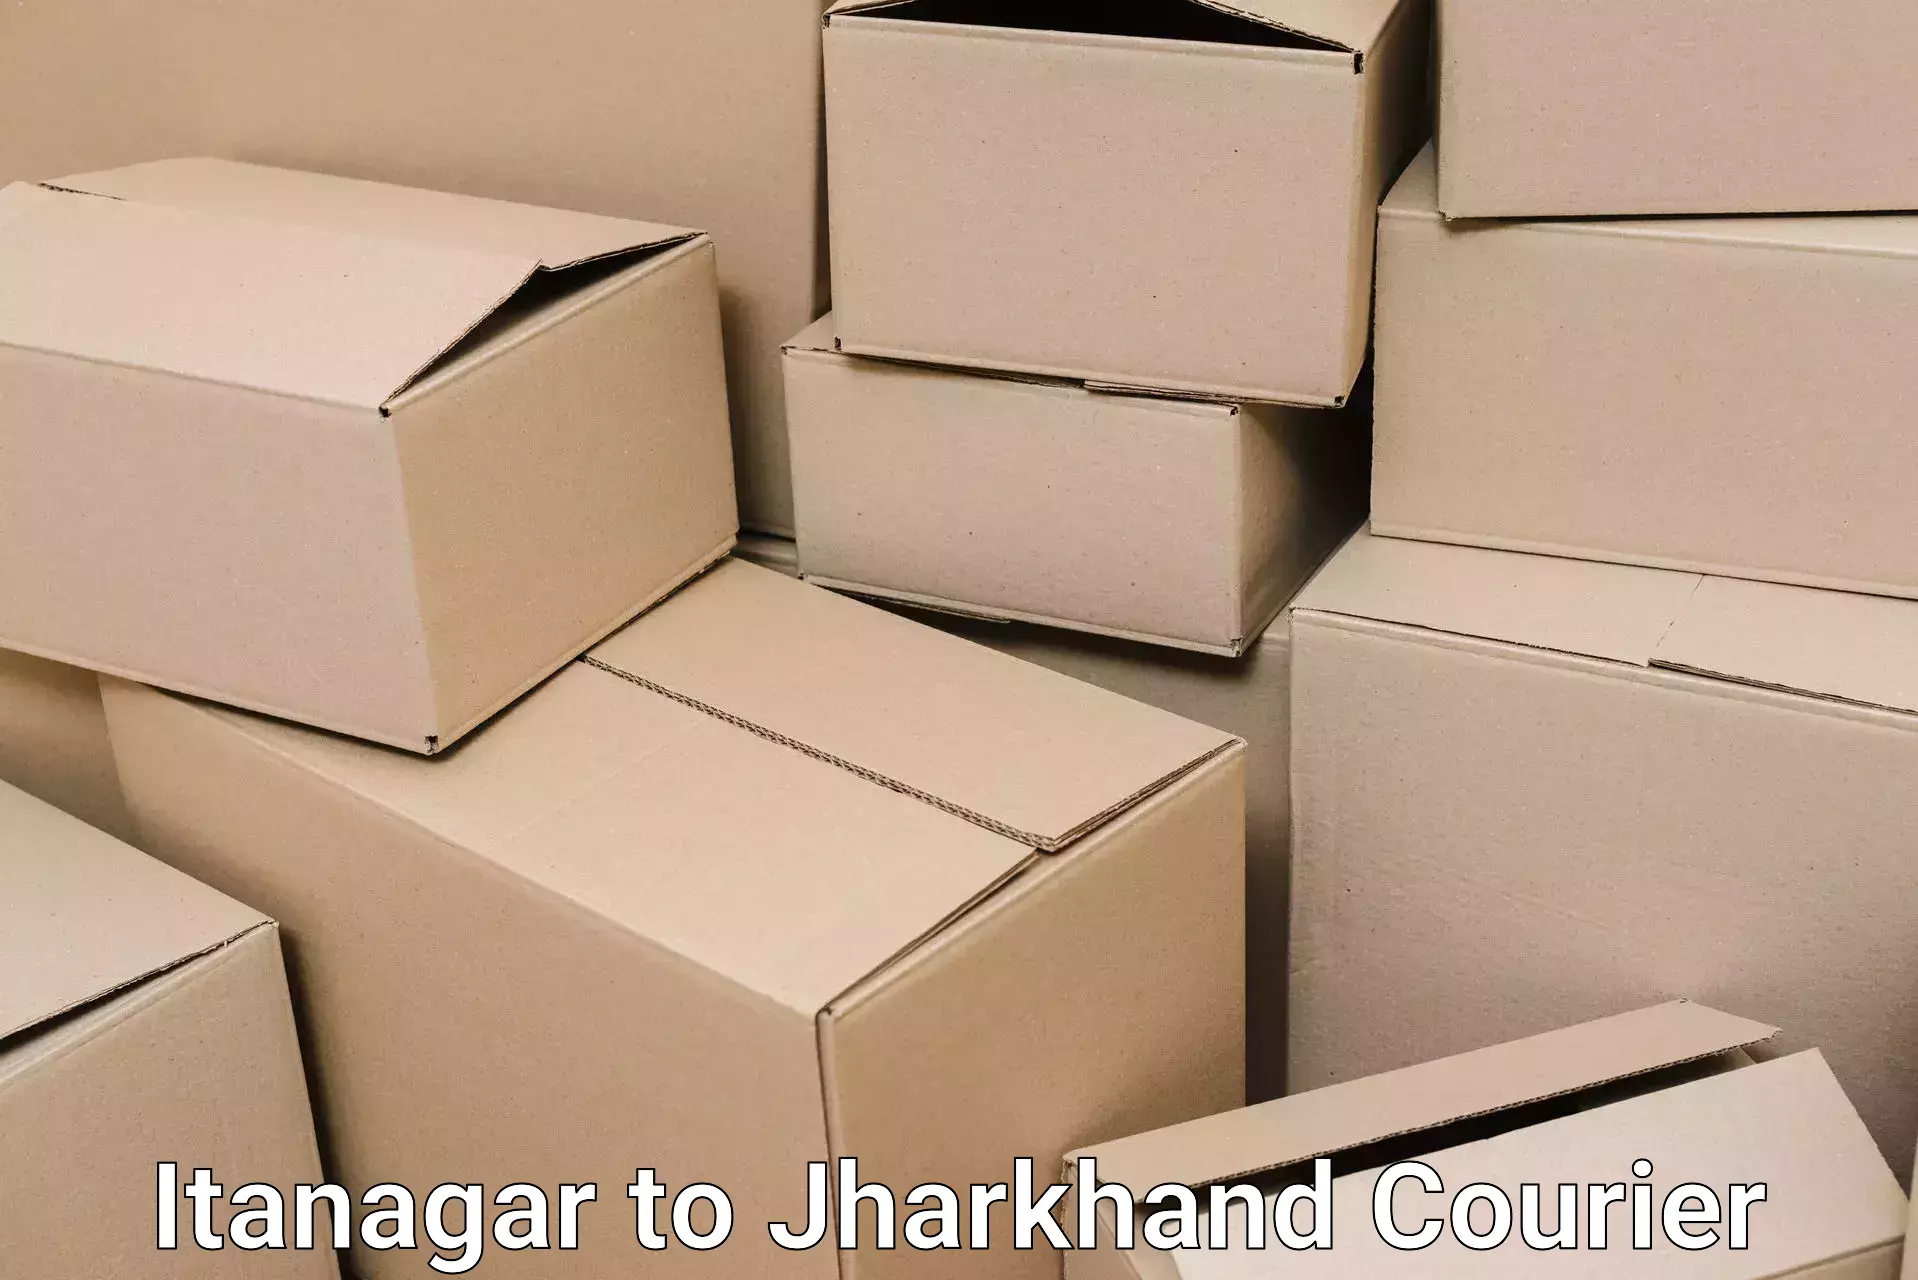 Trusted household movers Itanagar to Ranchi